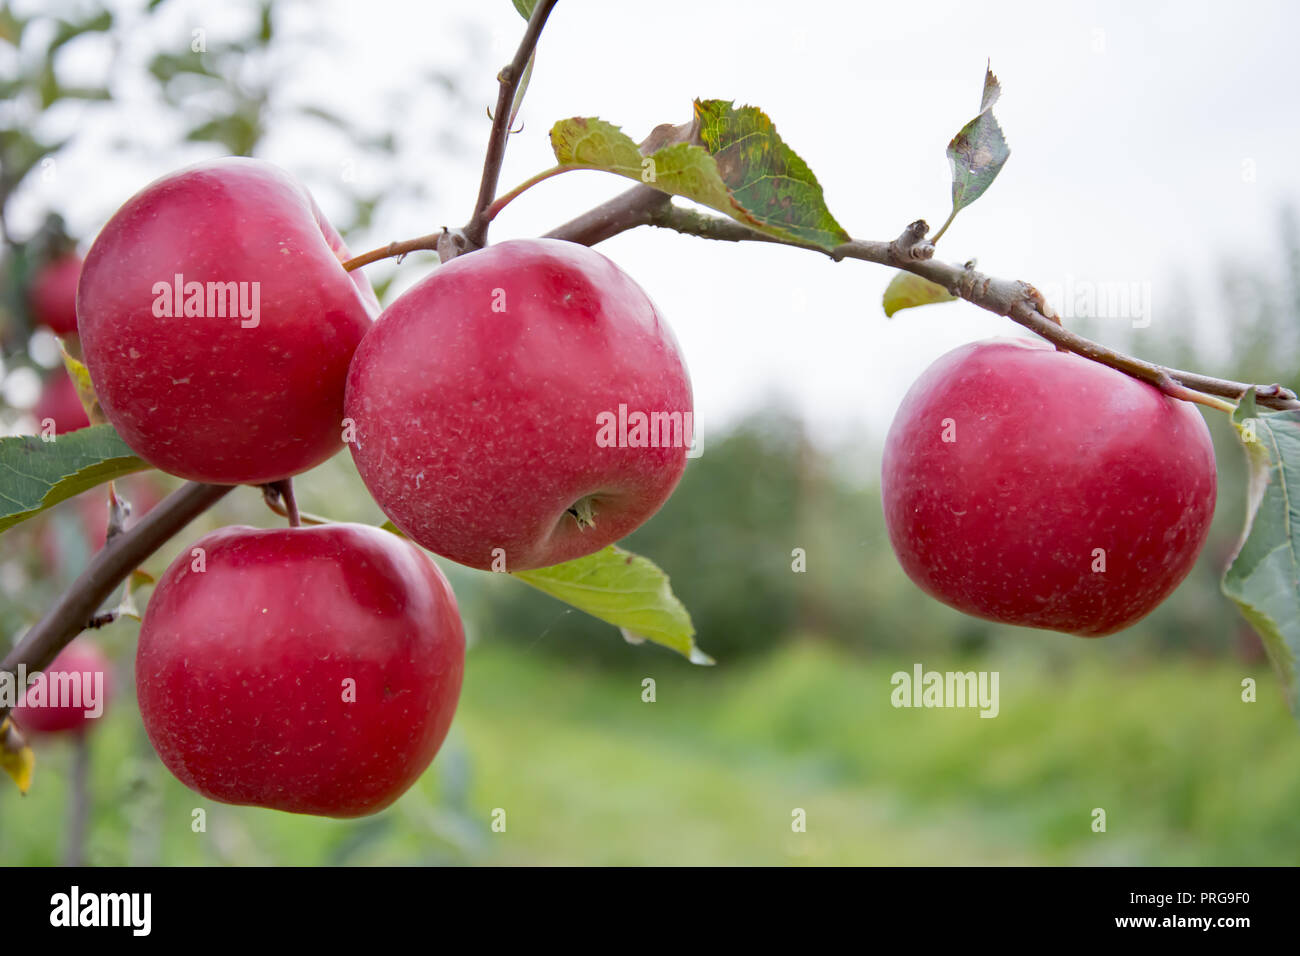 Four big, ripe, red apples hanging on a twig of a small apple tree Stock Photo